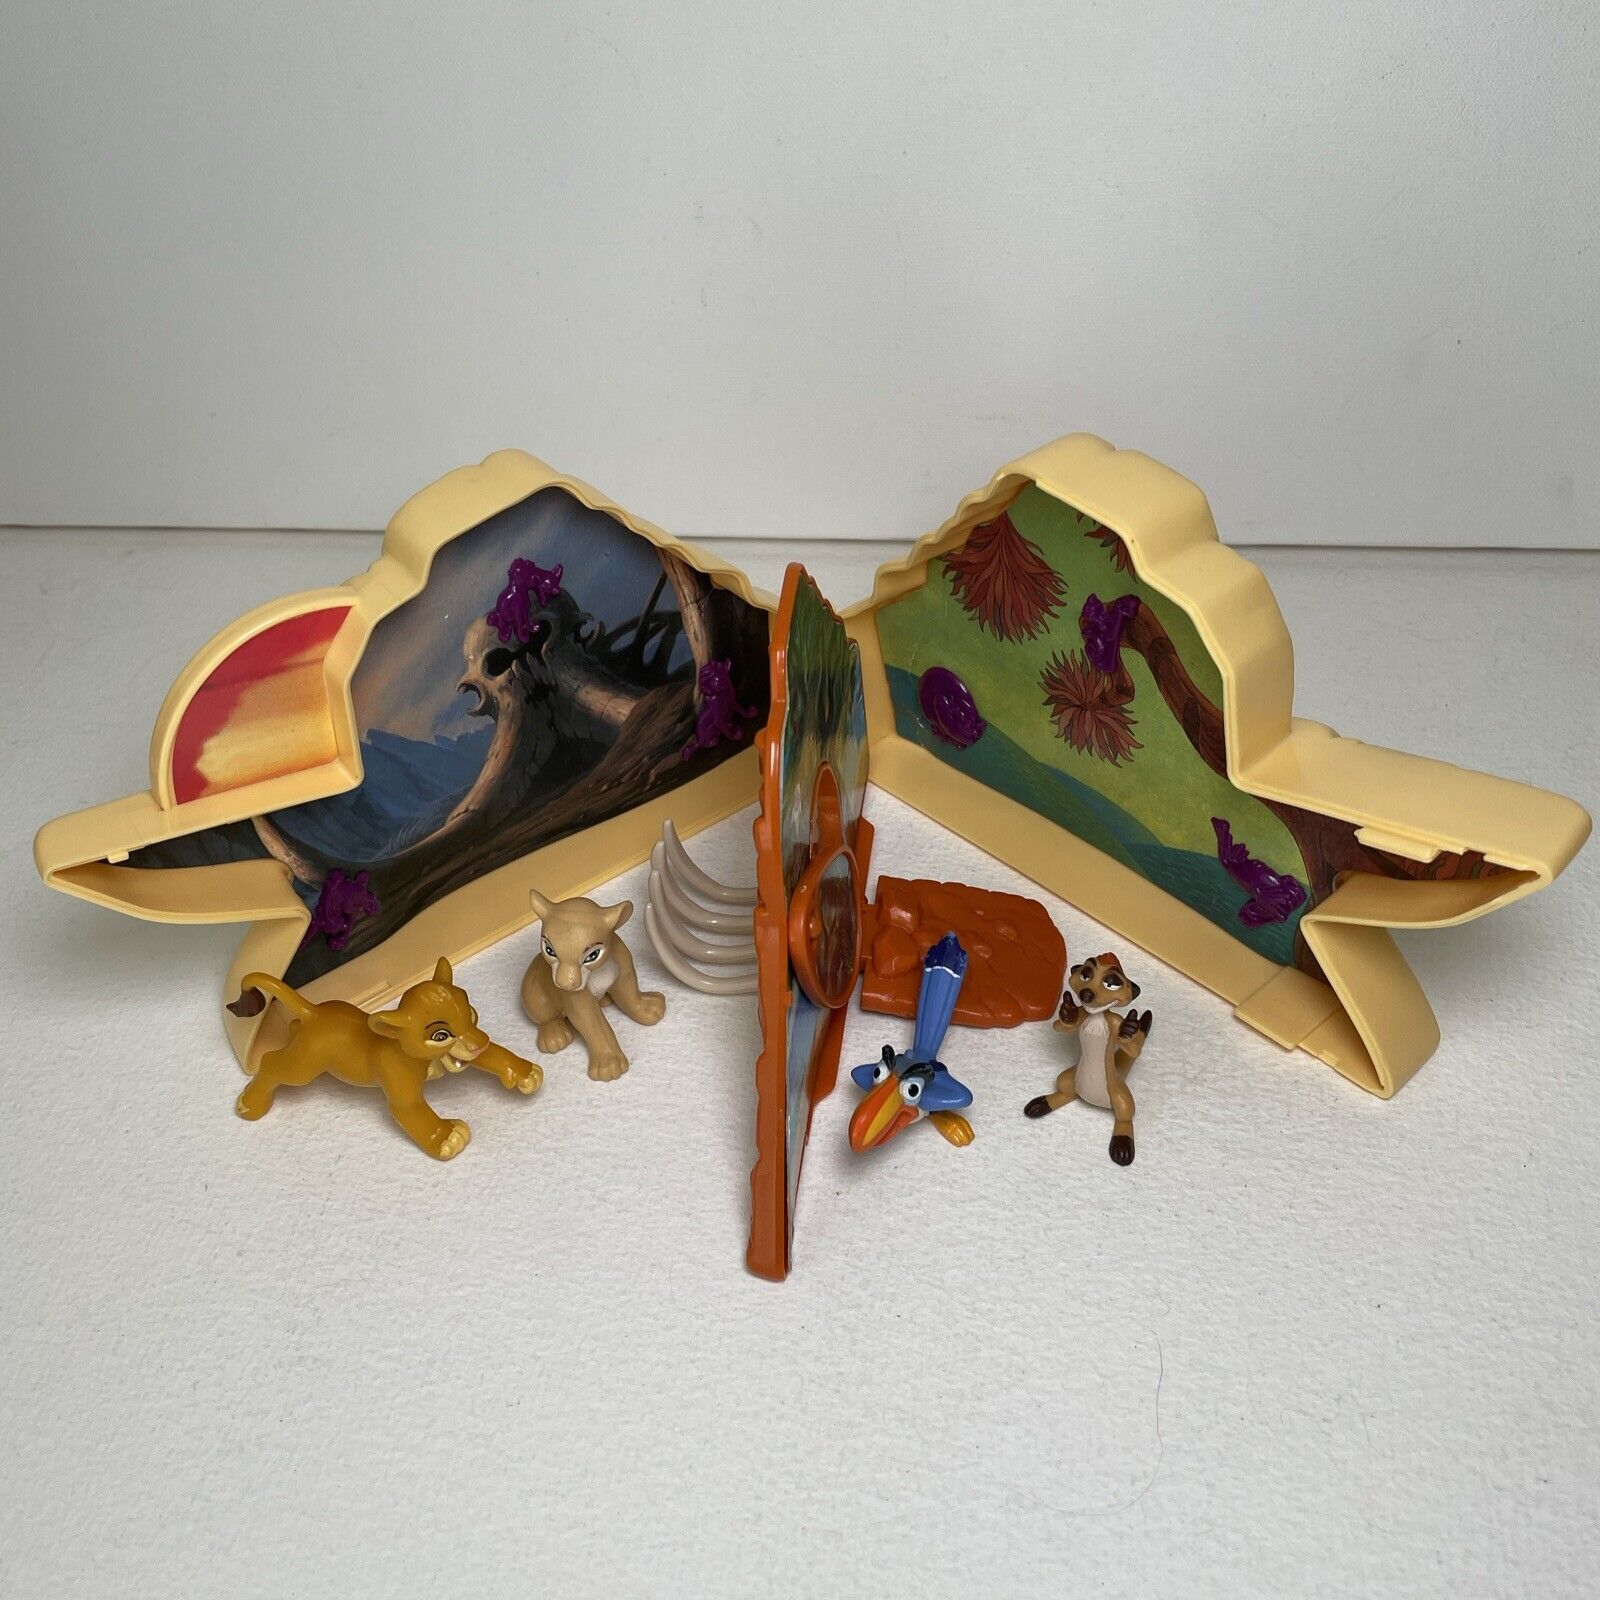 Vintage 1993 Disney The Lion King Once Upon A Time Playset W/ Figures, Complete